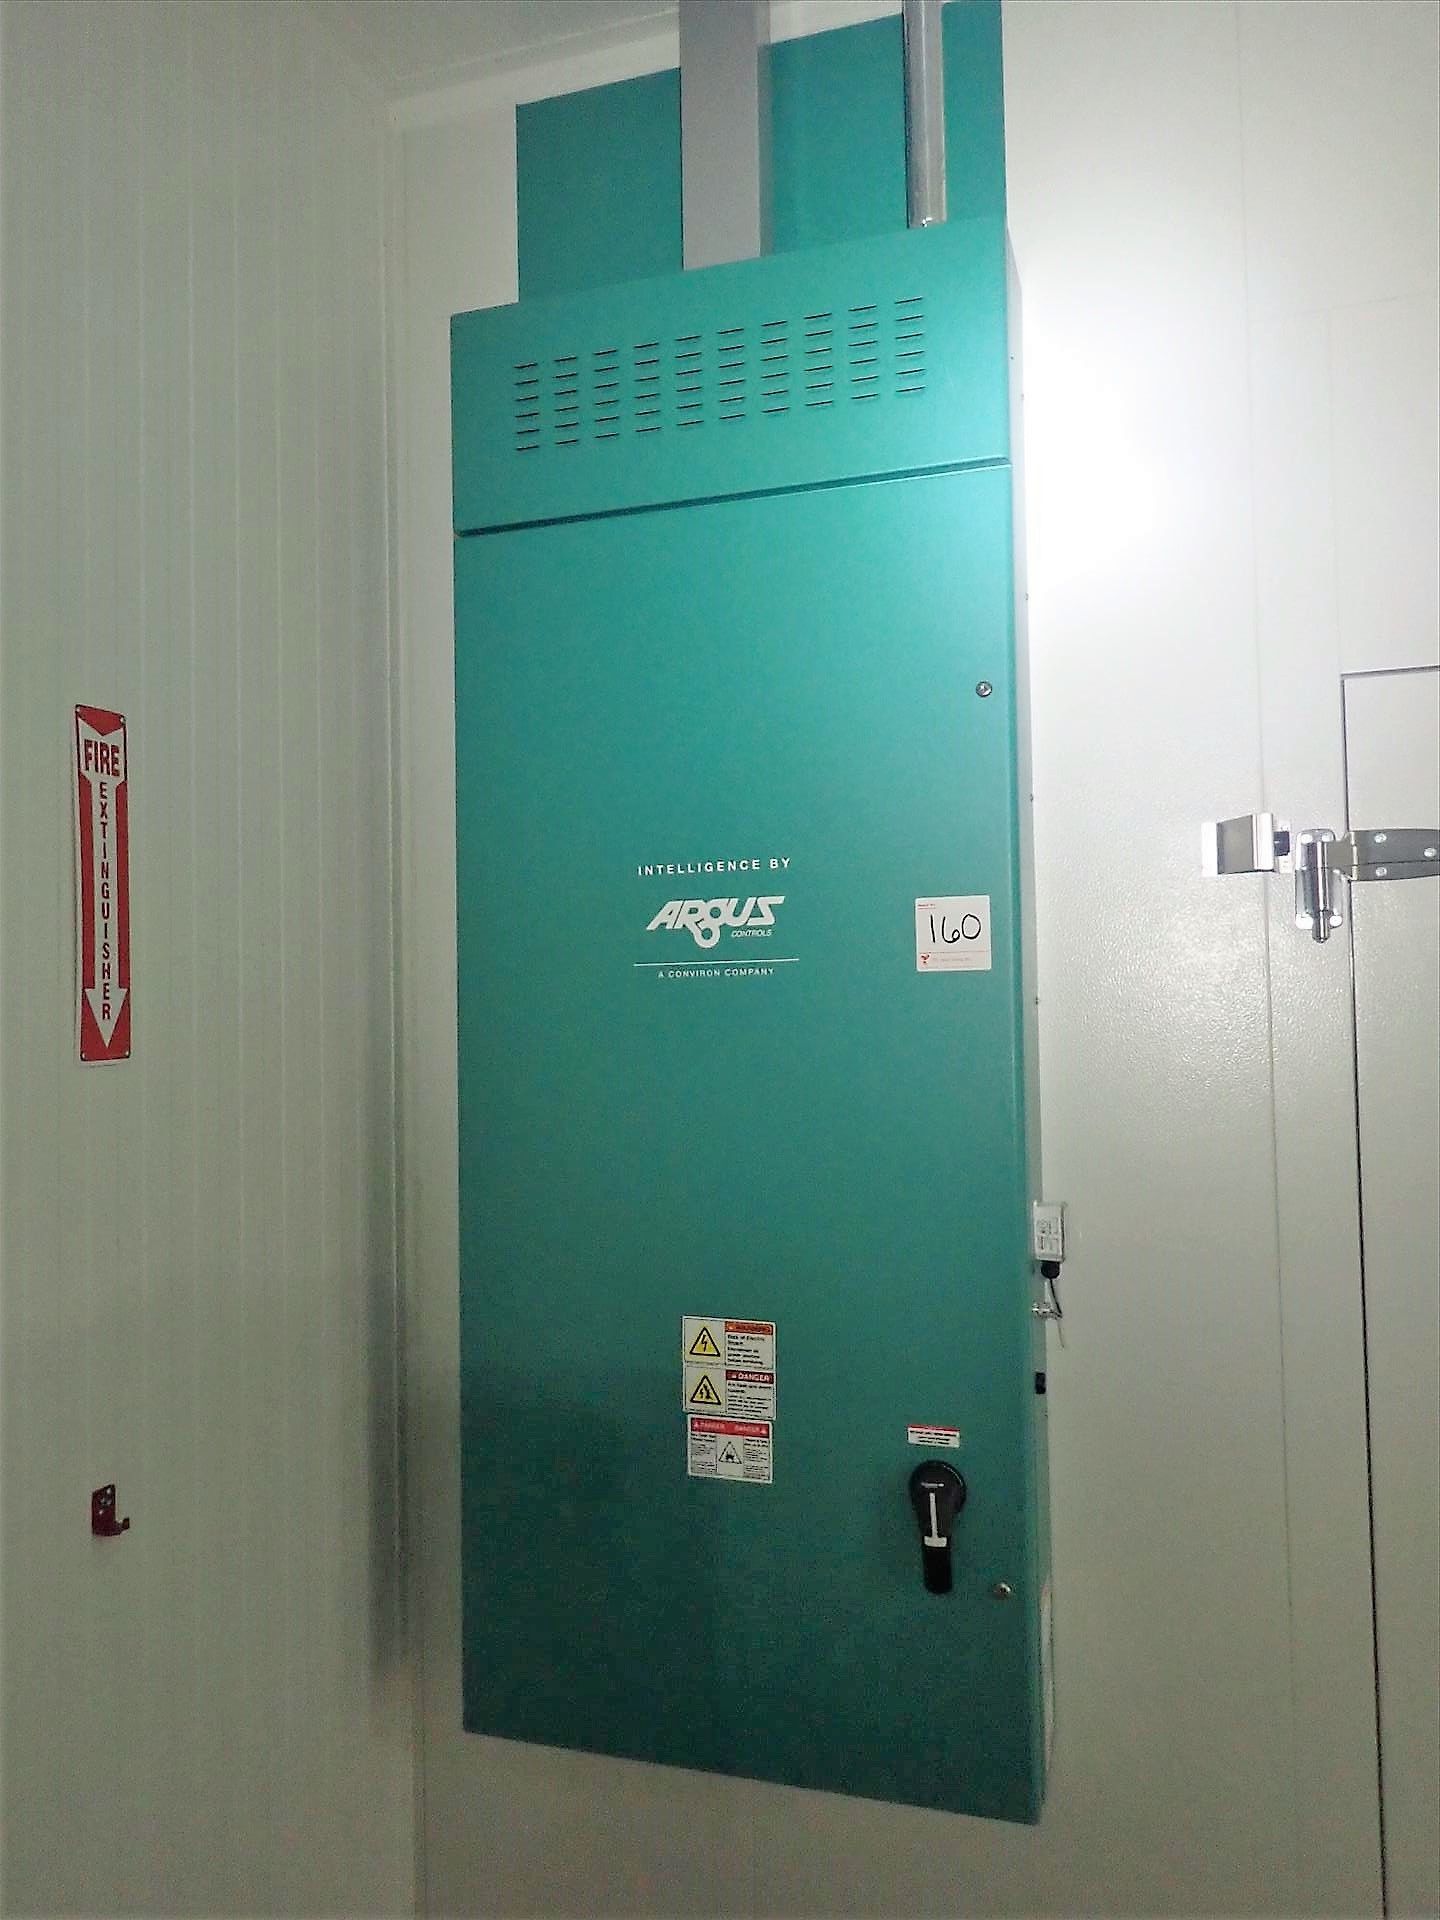 Conviron drying room, 50 ft. x 12 ft., ducting, perforated wall panels w/ Argus control panel, - Image 2 of 5